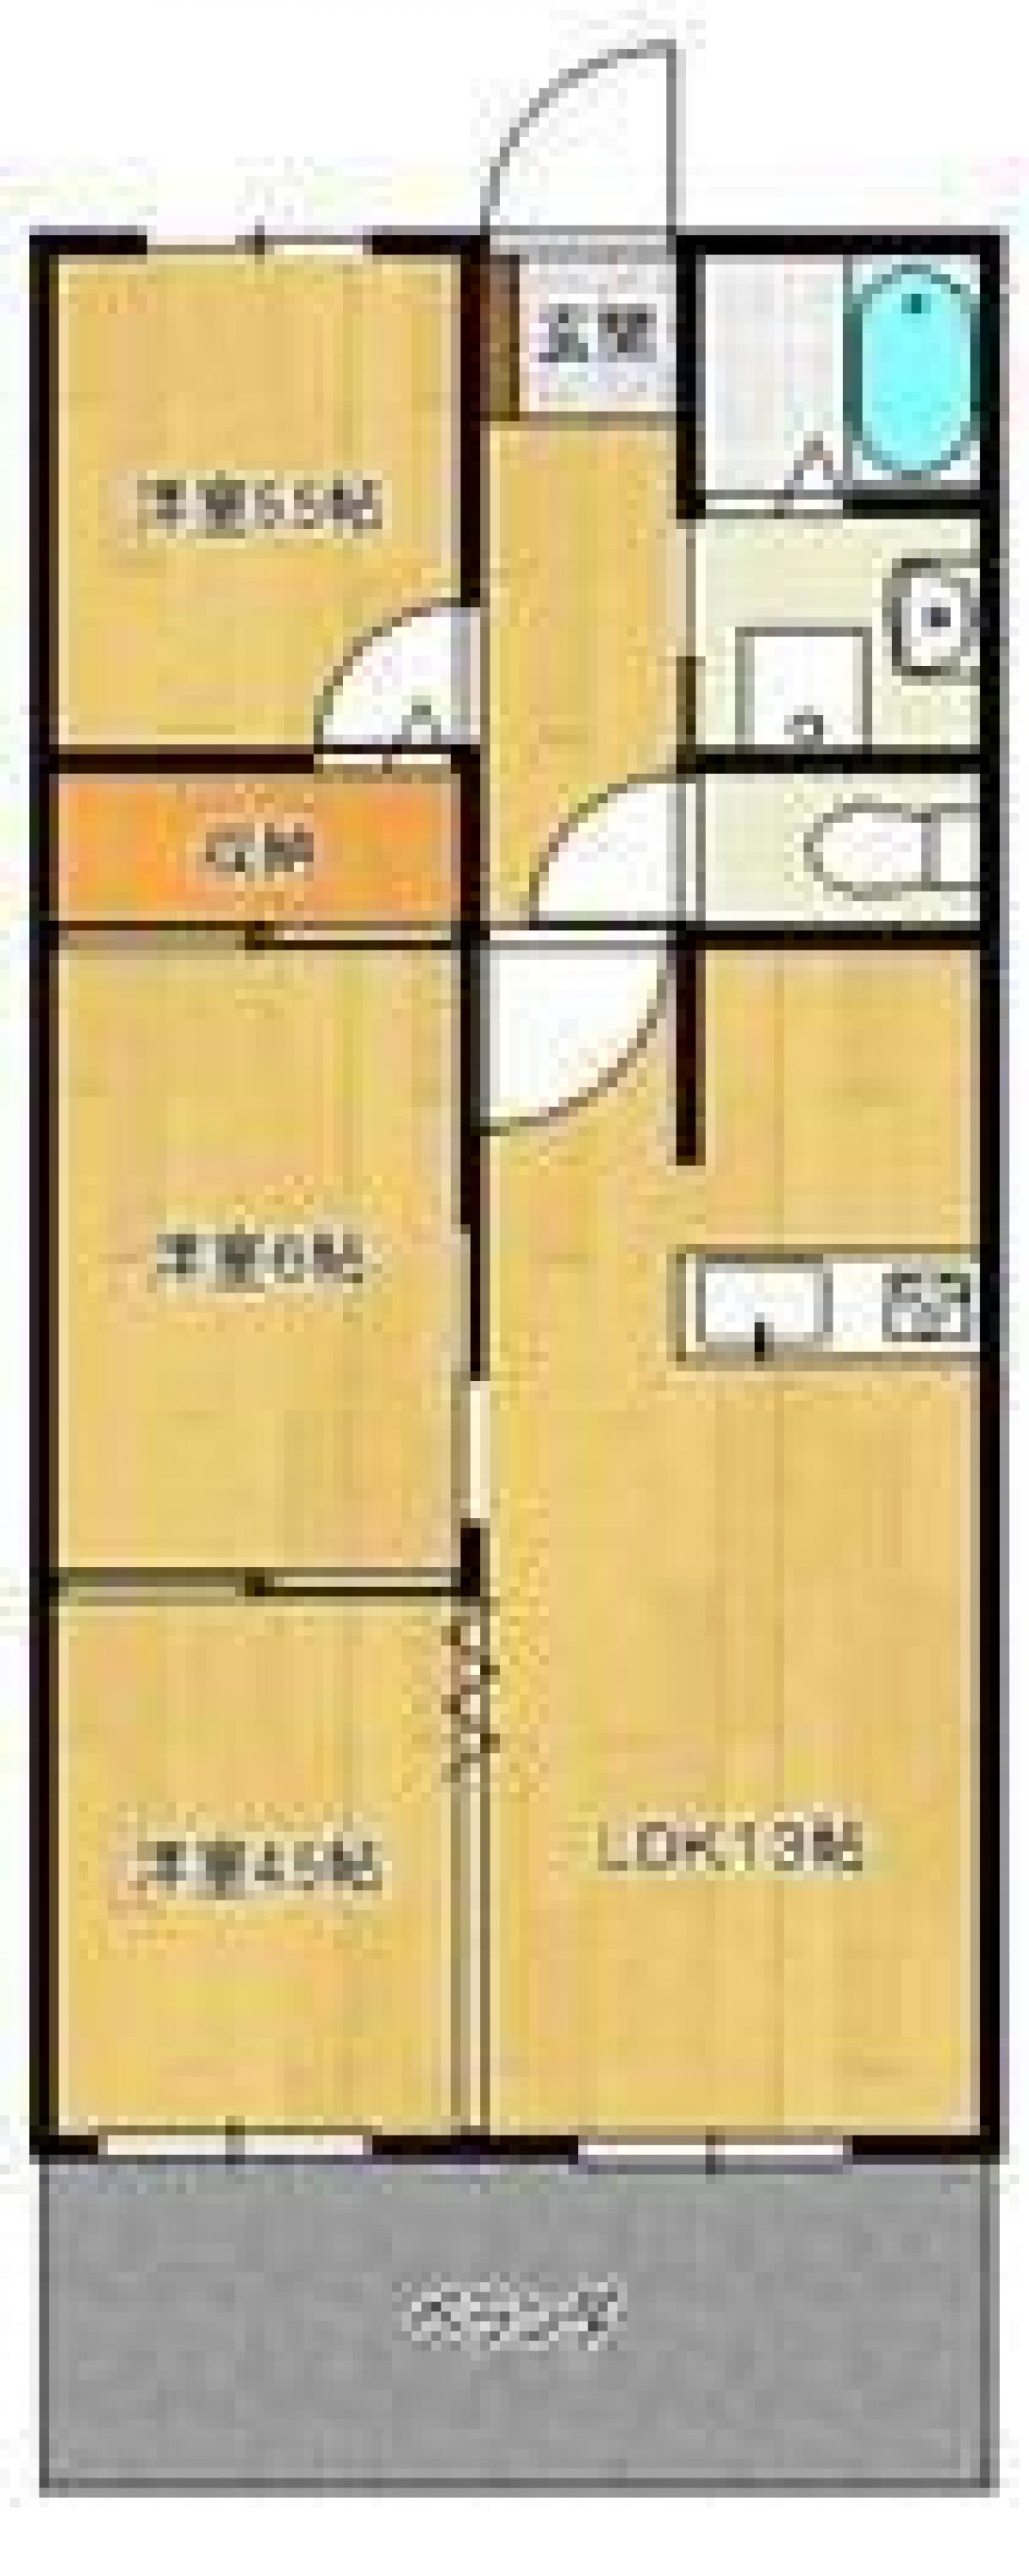 Picture of Apartment For Sale in Akashi Shi, Hyogo, Japan